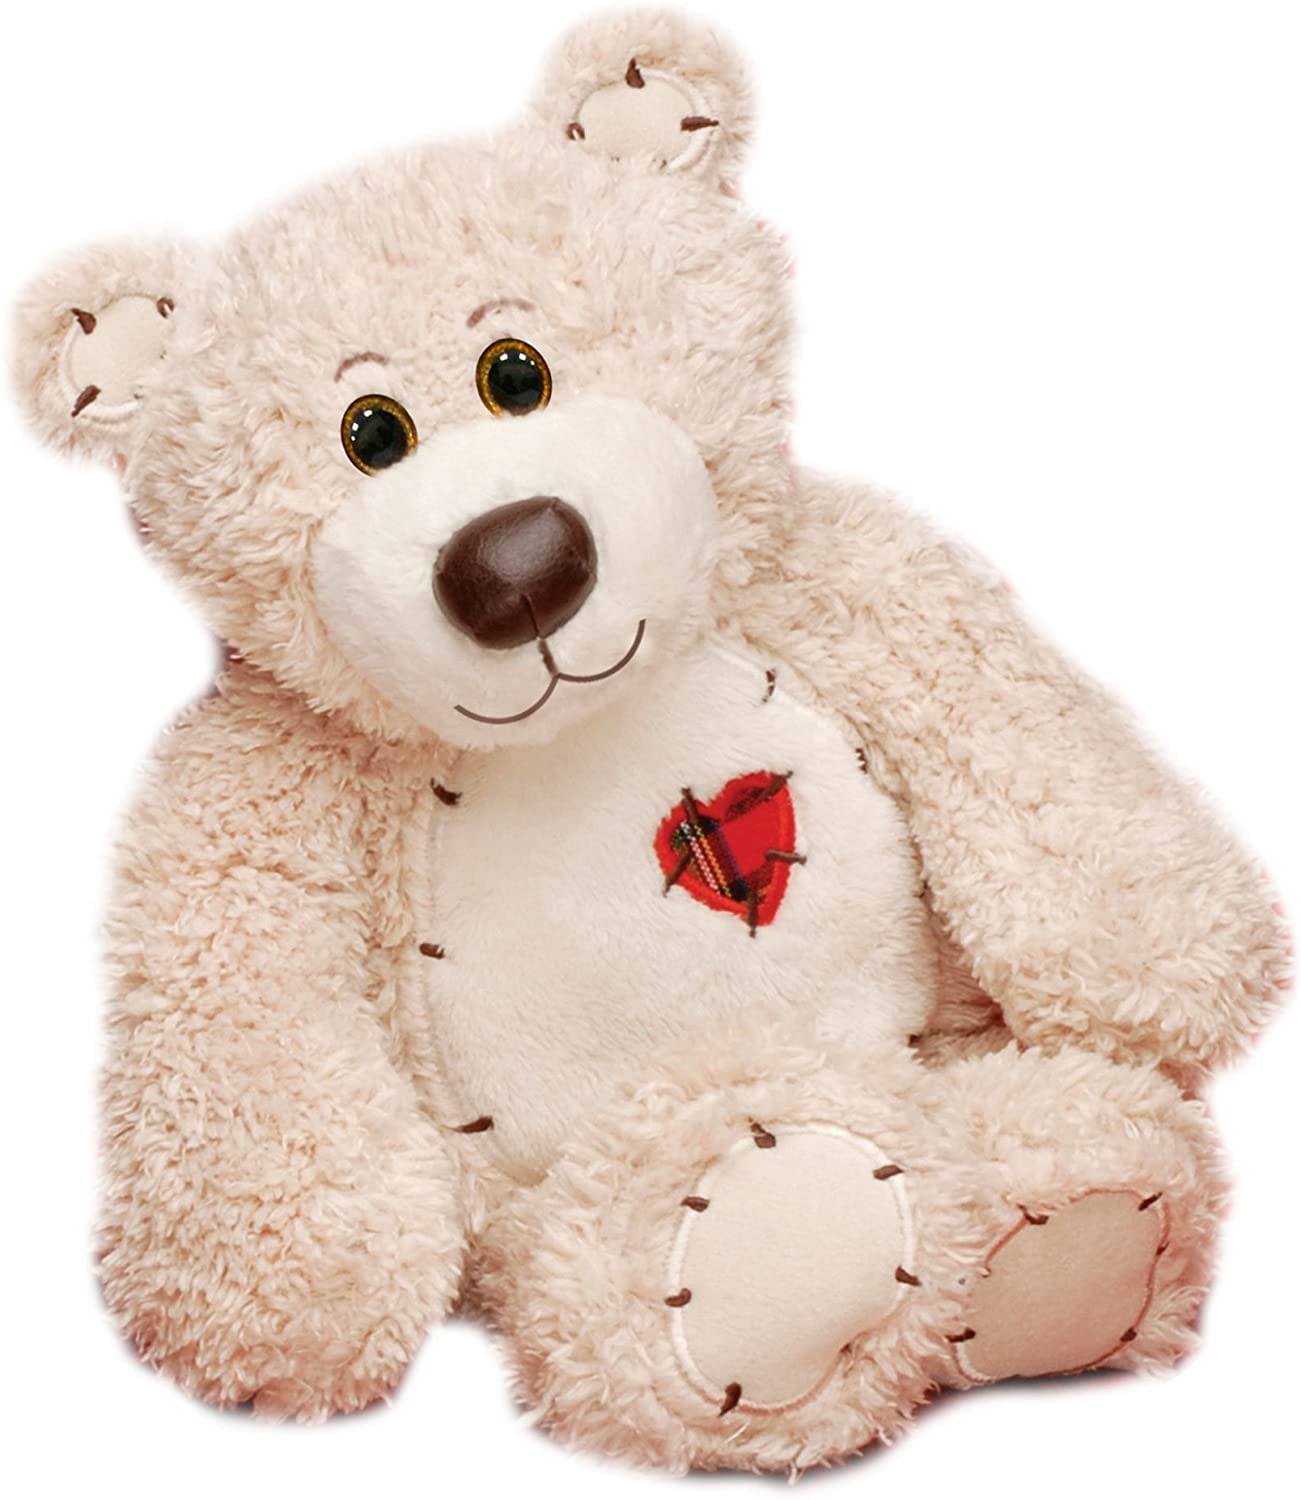 Details about   10 Inches Shaded Grey/White Or Brown/white-Metalic Hot Pink Teddy Bear 